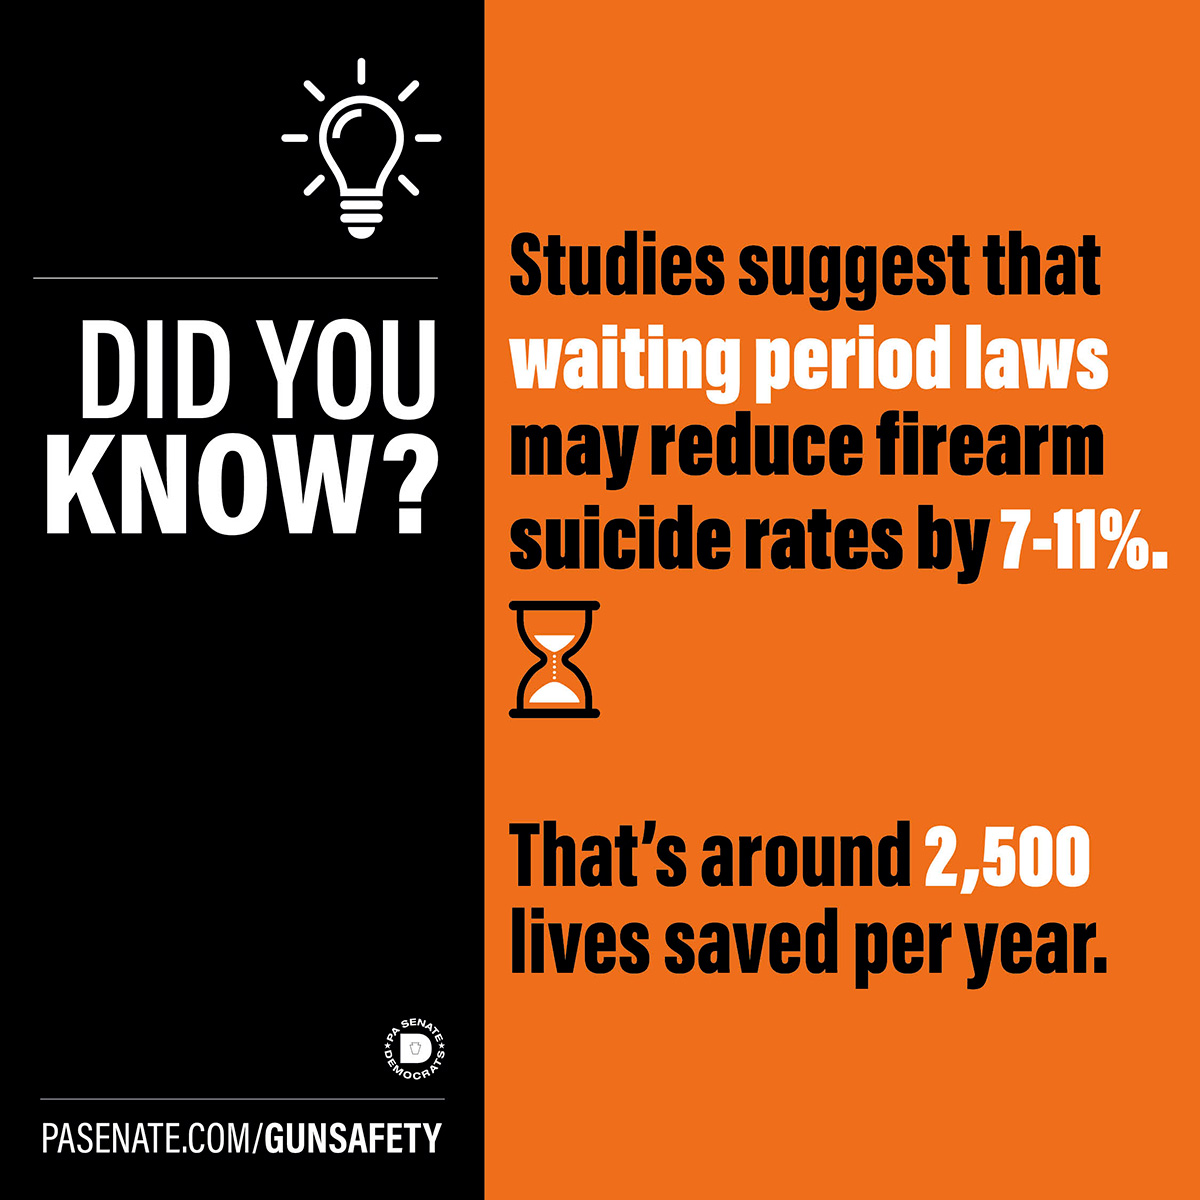 Did you know? Studies suggest that waiting periods laws may reduce firearm suicide rates by 7-11%.